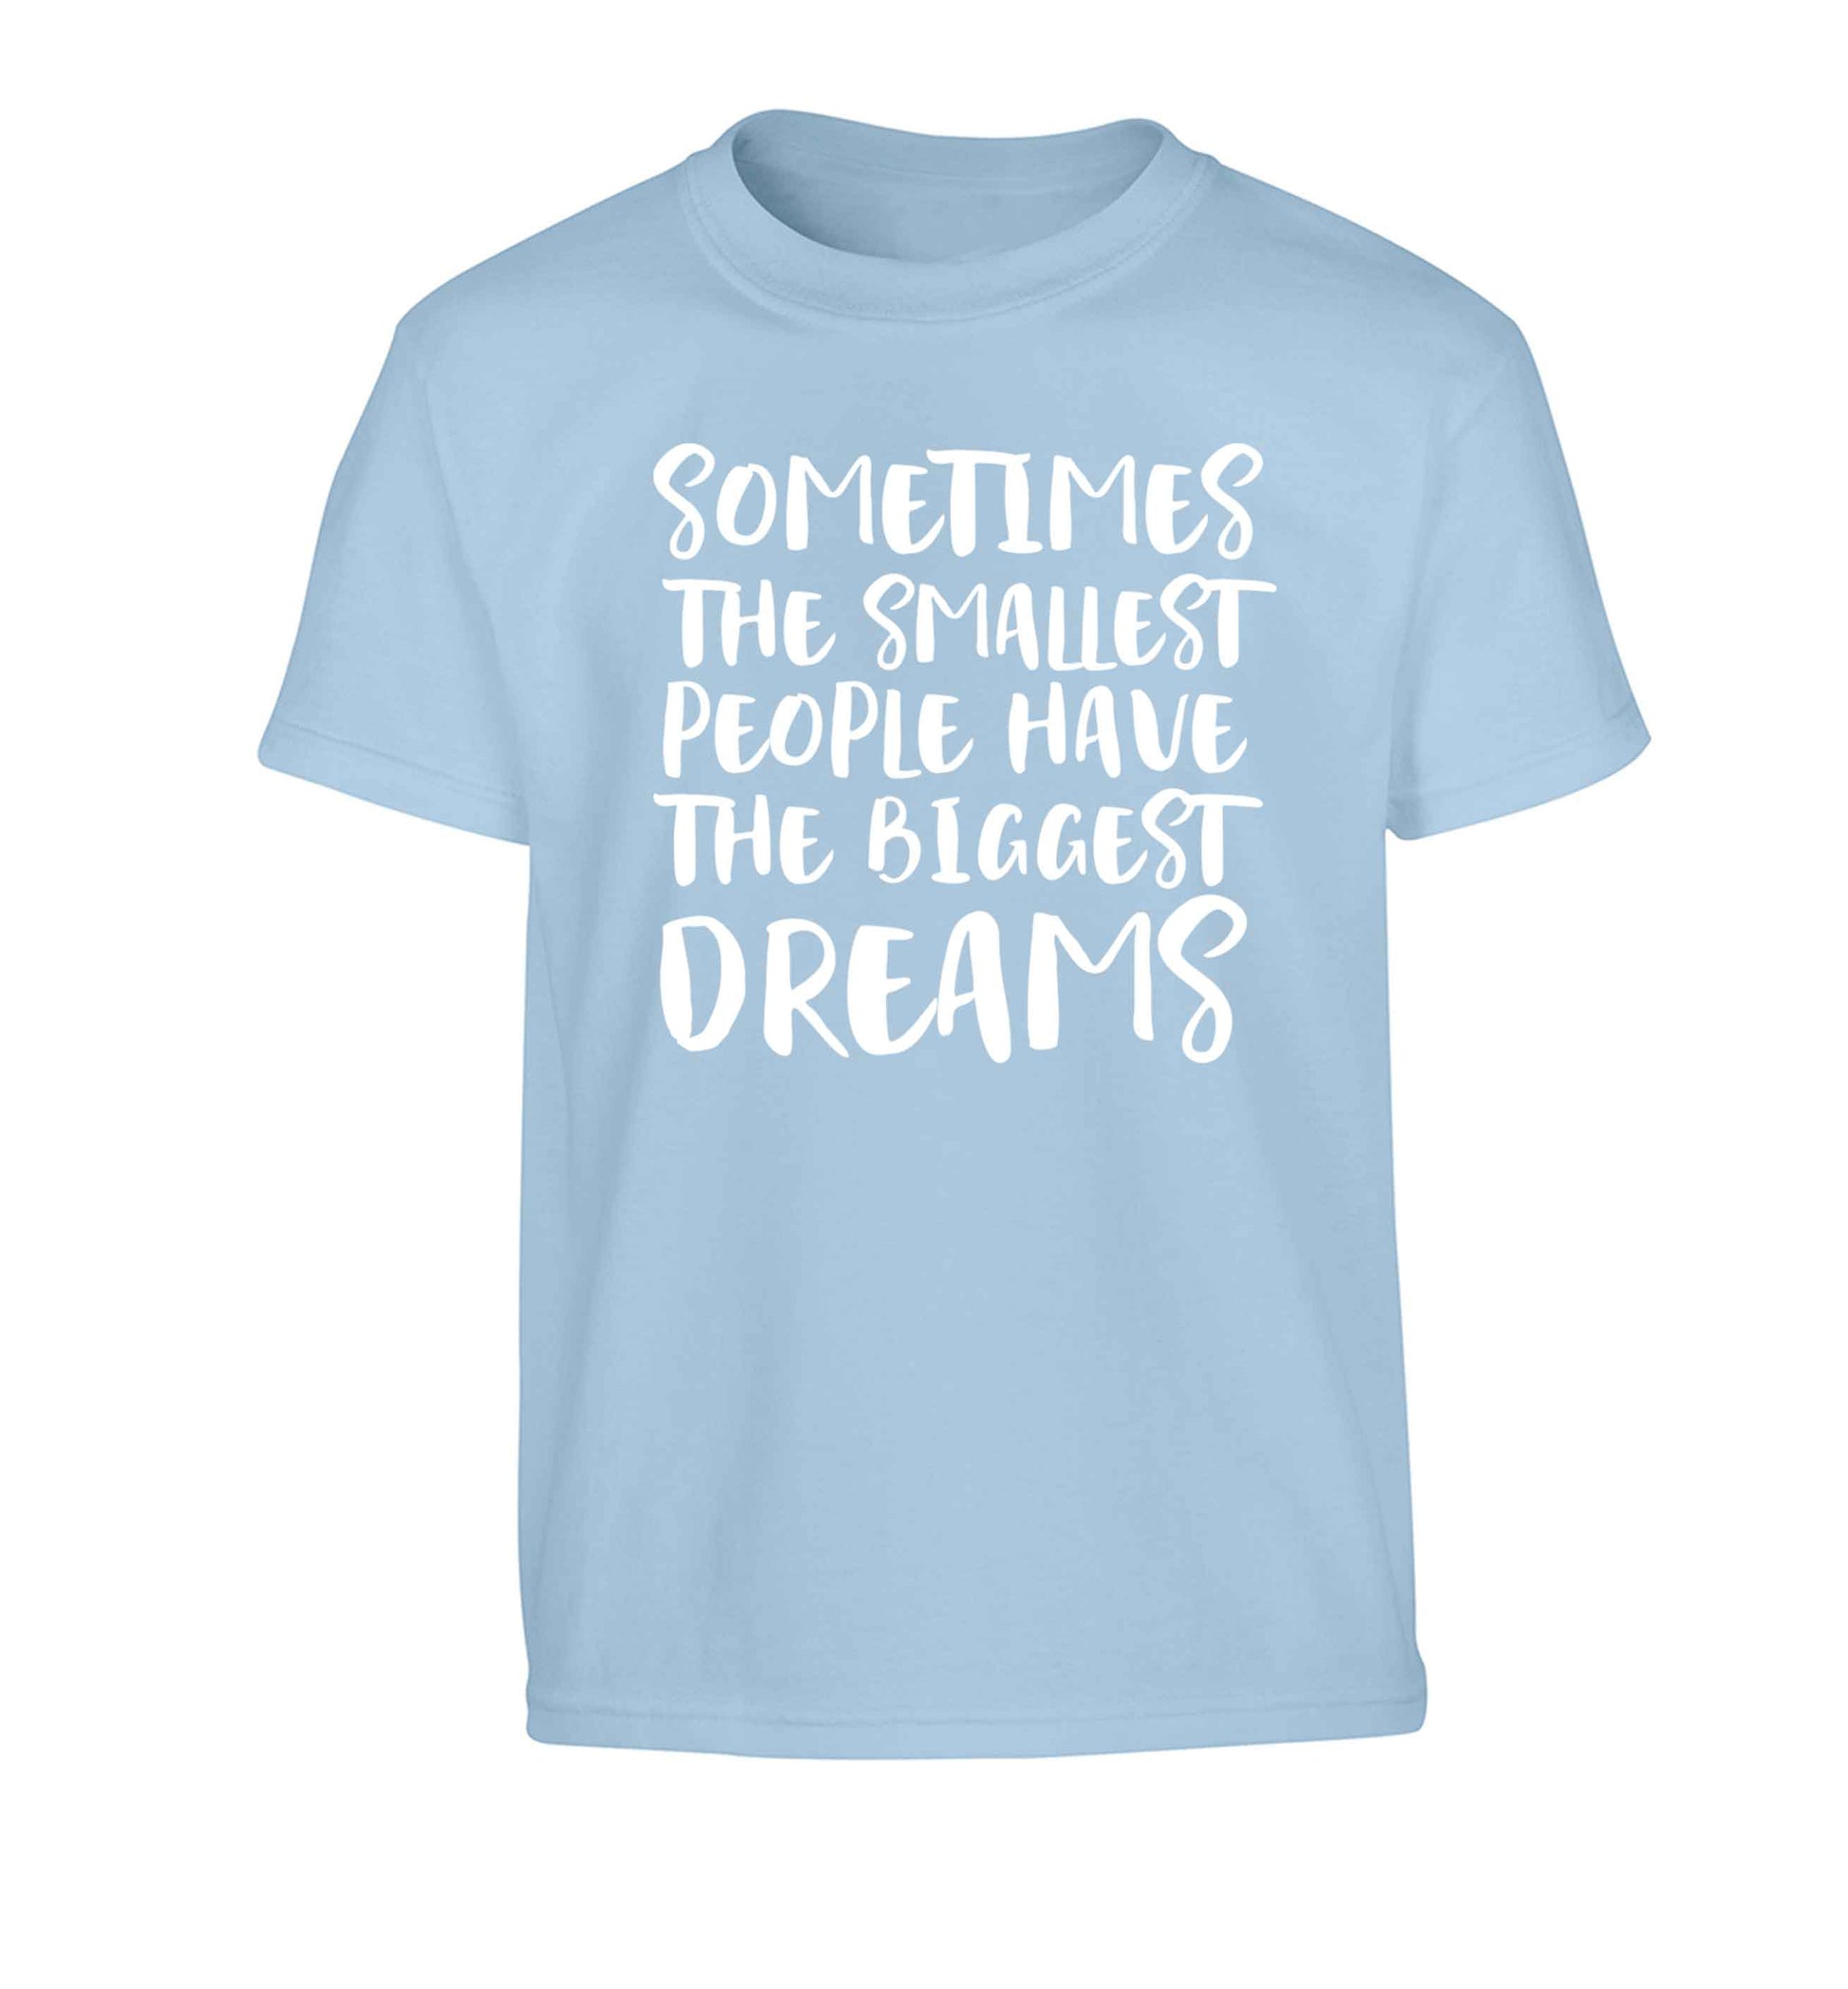 Sometimes the smallest people have the biggest dreams Children's light blue Tshirt 12-13 Years